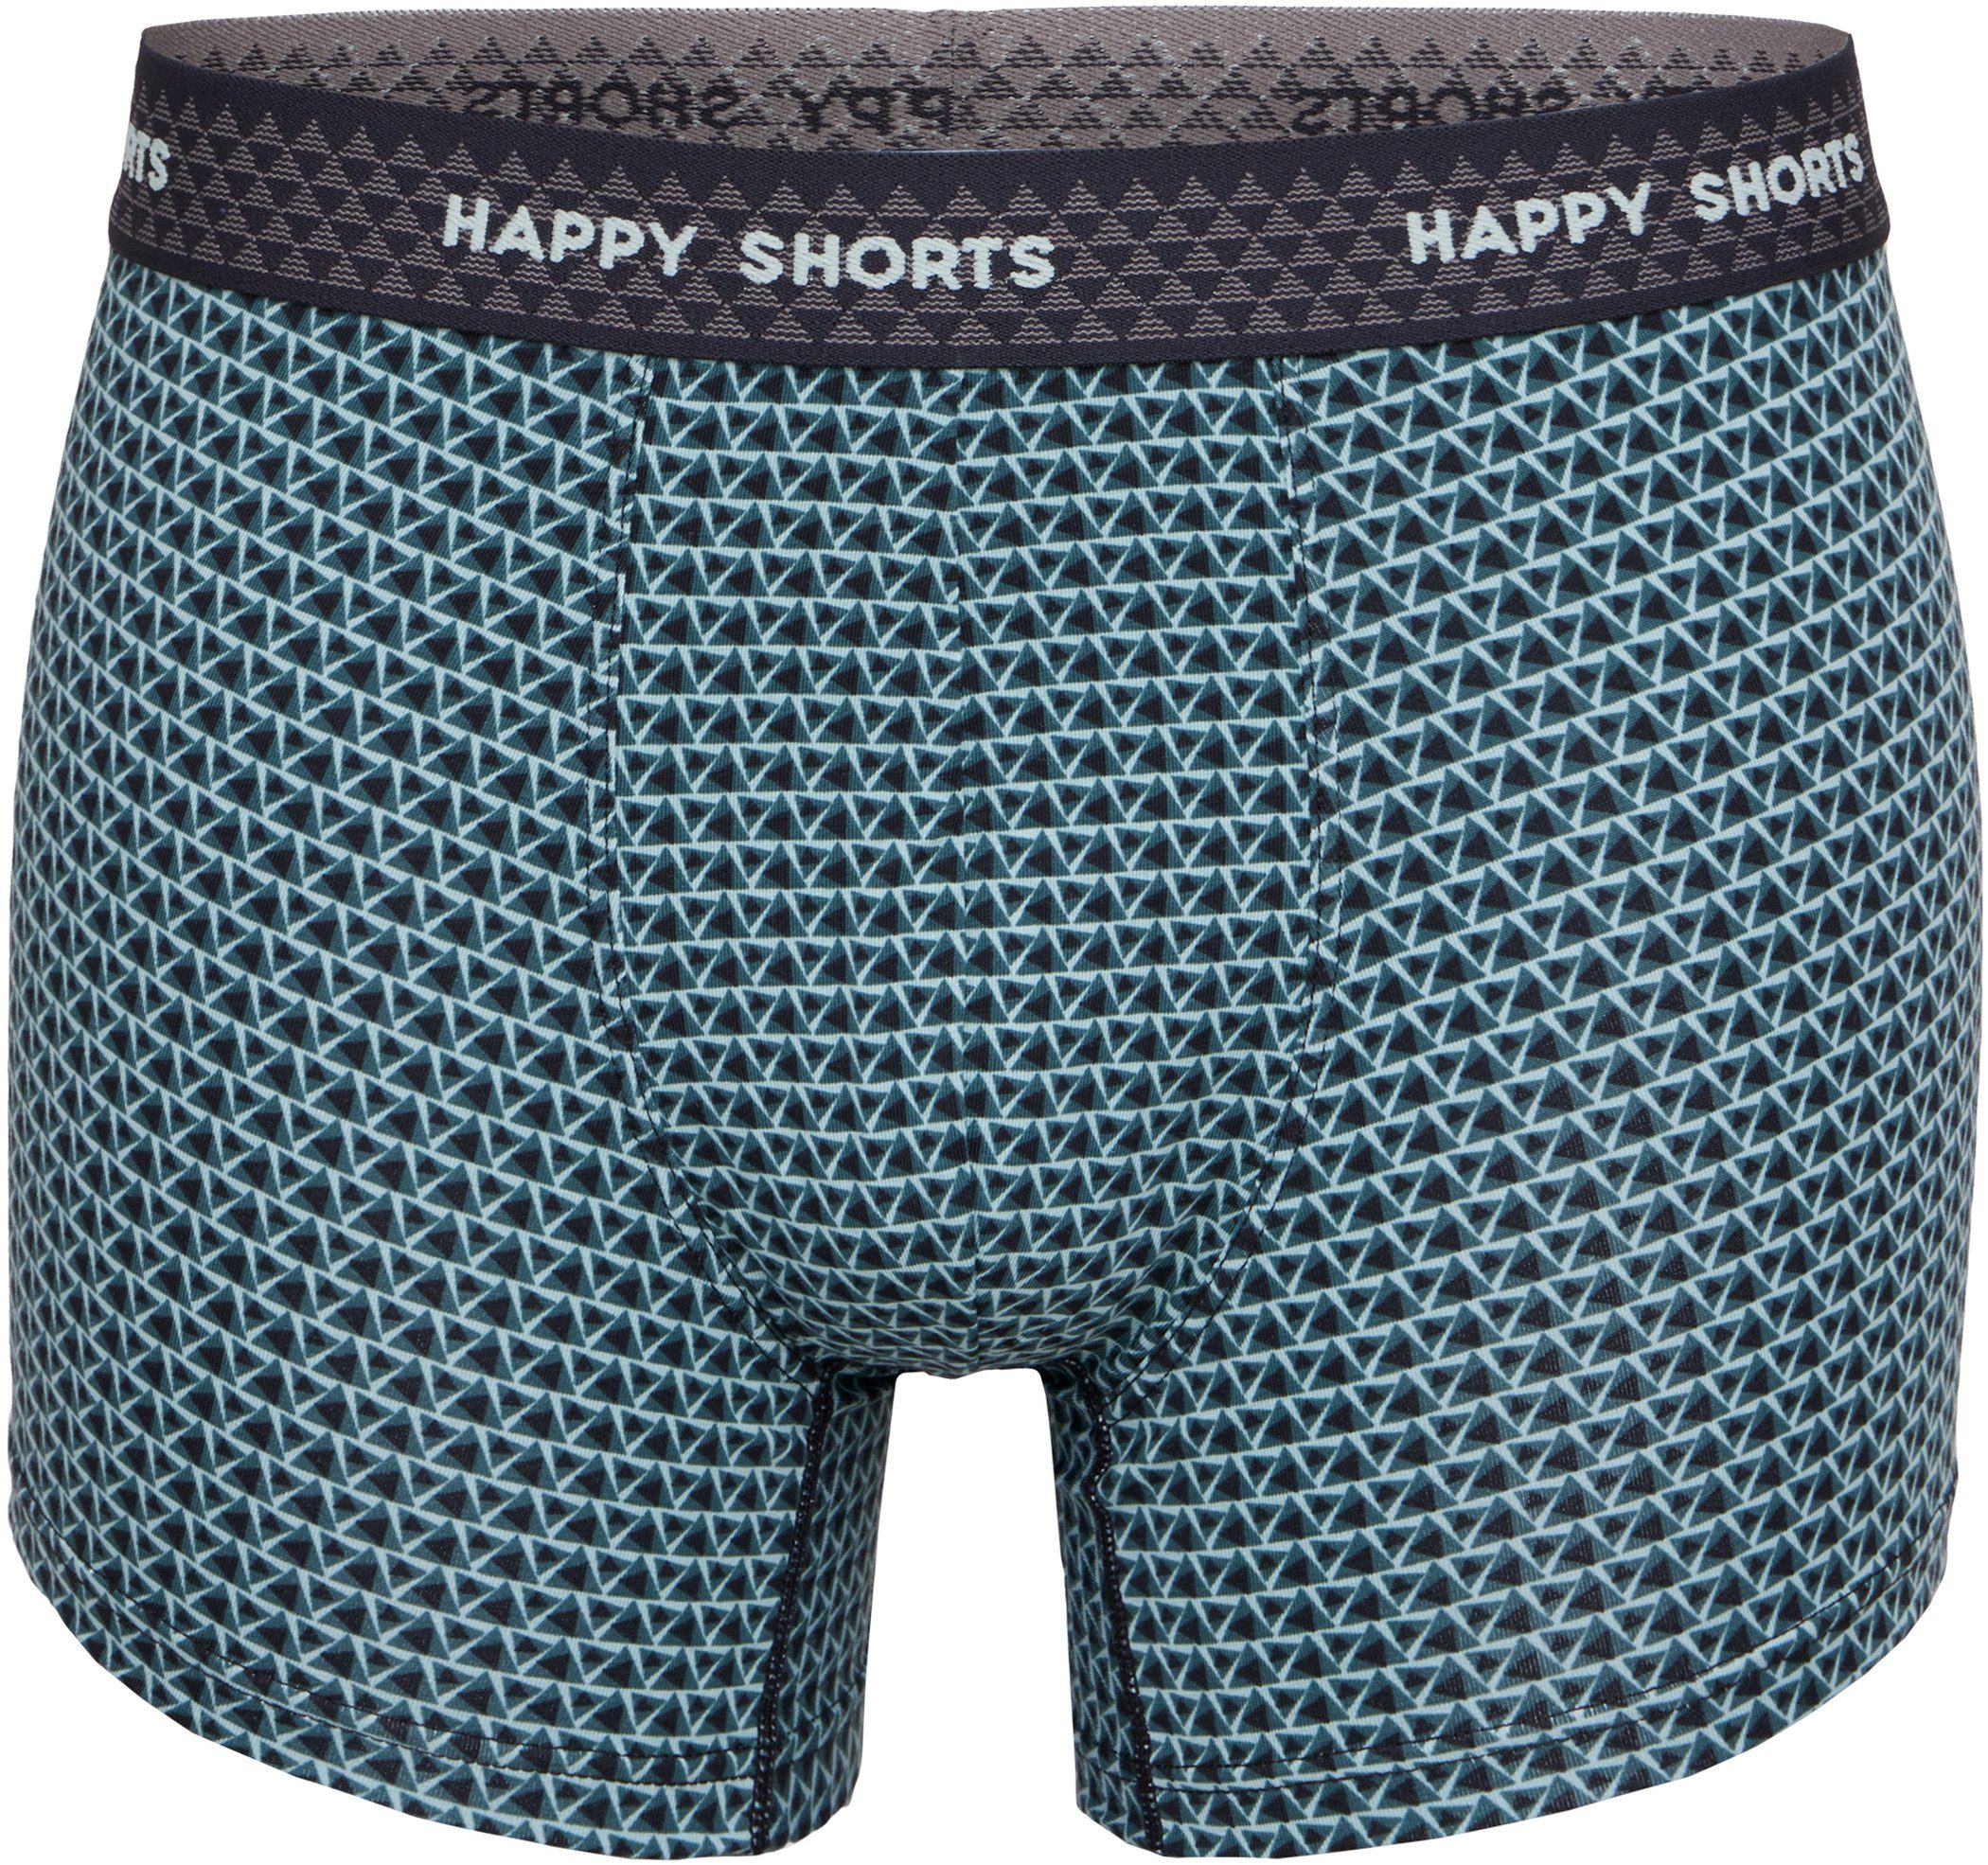 SHORTS Happy Pant (1-St) Jersey Trunk Sparpack Boxershorts Trunk 4er Pants Herren Shorts HAPPY